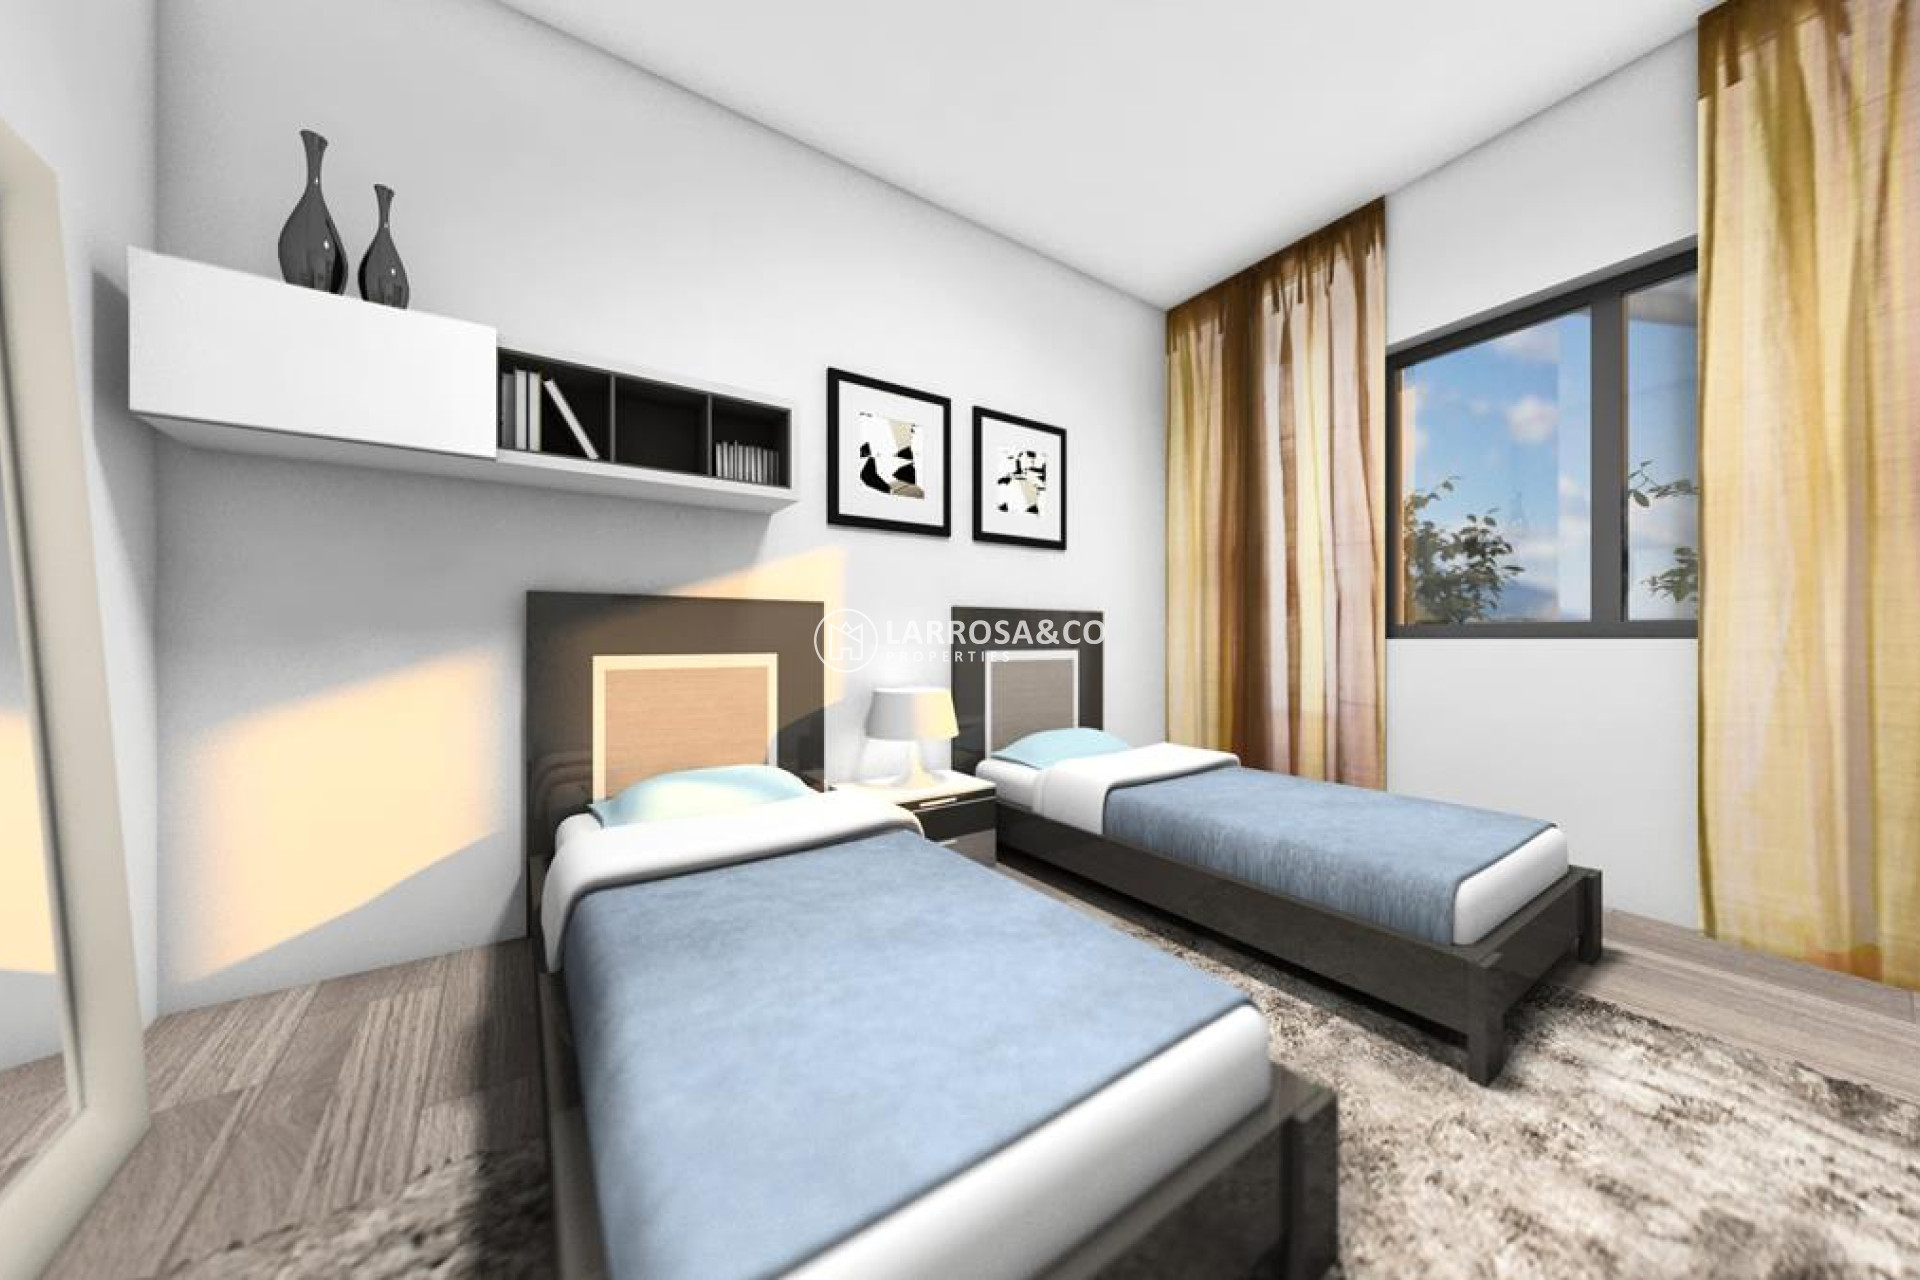 new-build-apartment-torrevieja-center-bedroom-5-on2116